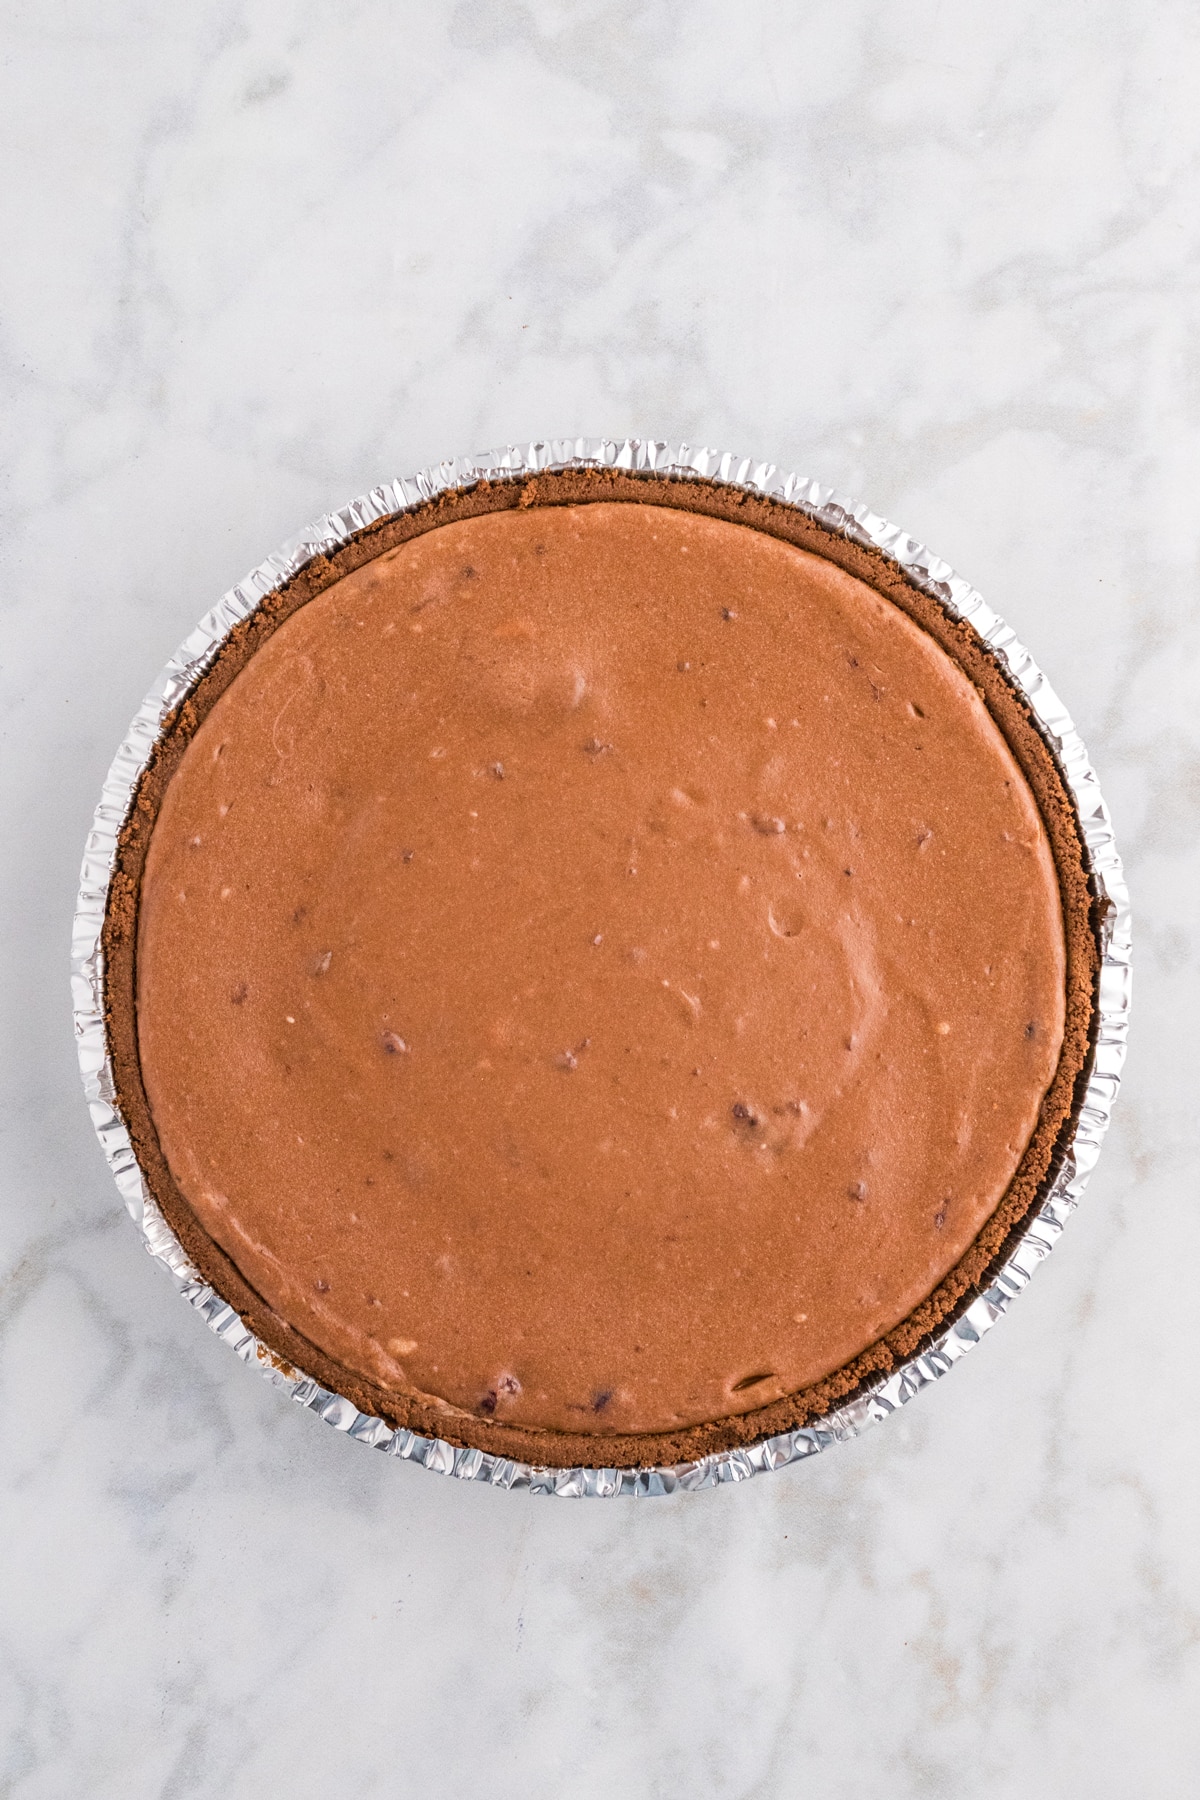 Another process in preparing Chocolate Cherry Cheesecake is to pour the cheesecake filling into the premade chocolate crust, spreading it evenly.